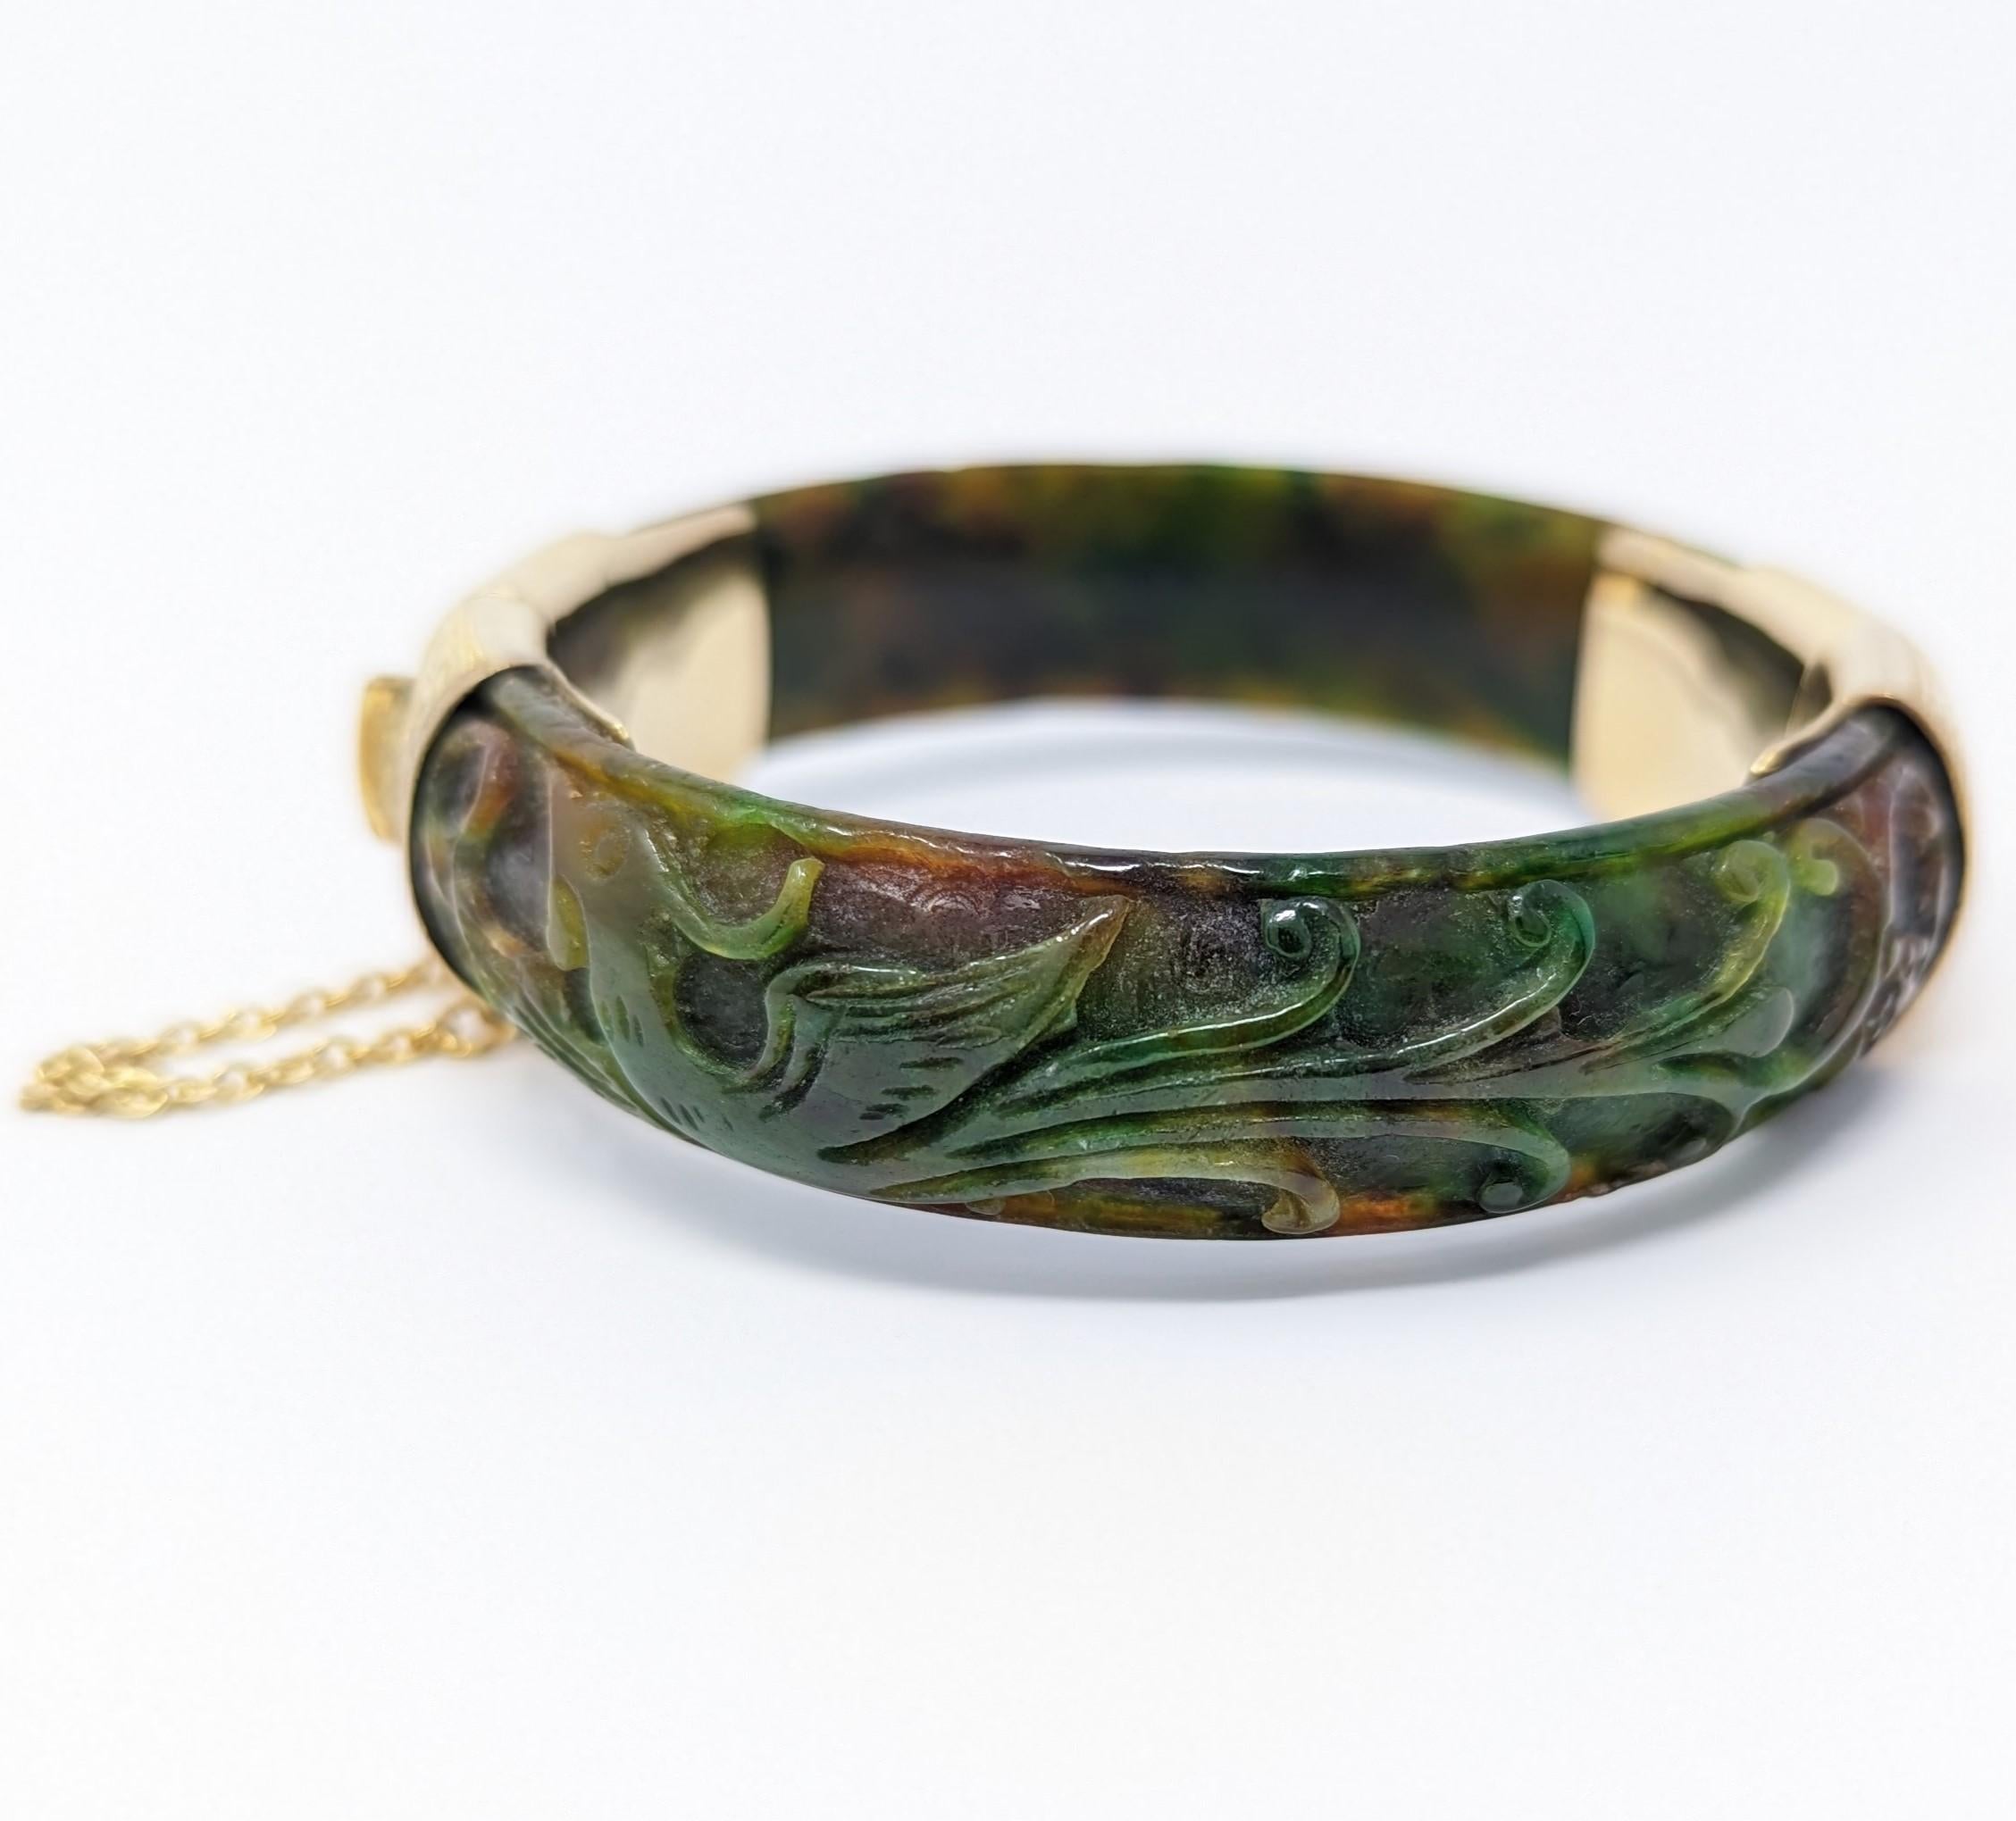 Gorgeous vintage to antique hand carved nephrite jade bracelet. Accentuated with 14k solid yellow gold, this enchanting piece features what looks to be a phoenix on one side and a dragon on the other side. Hallmarked 